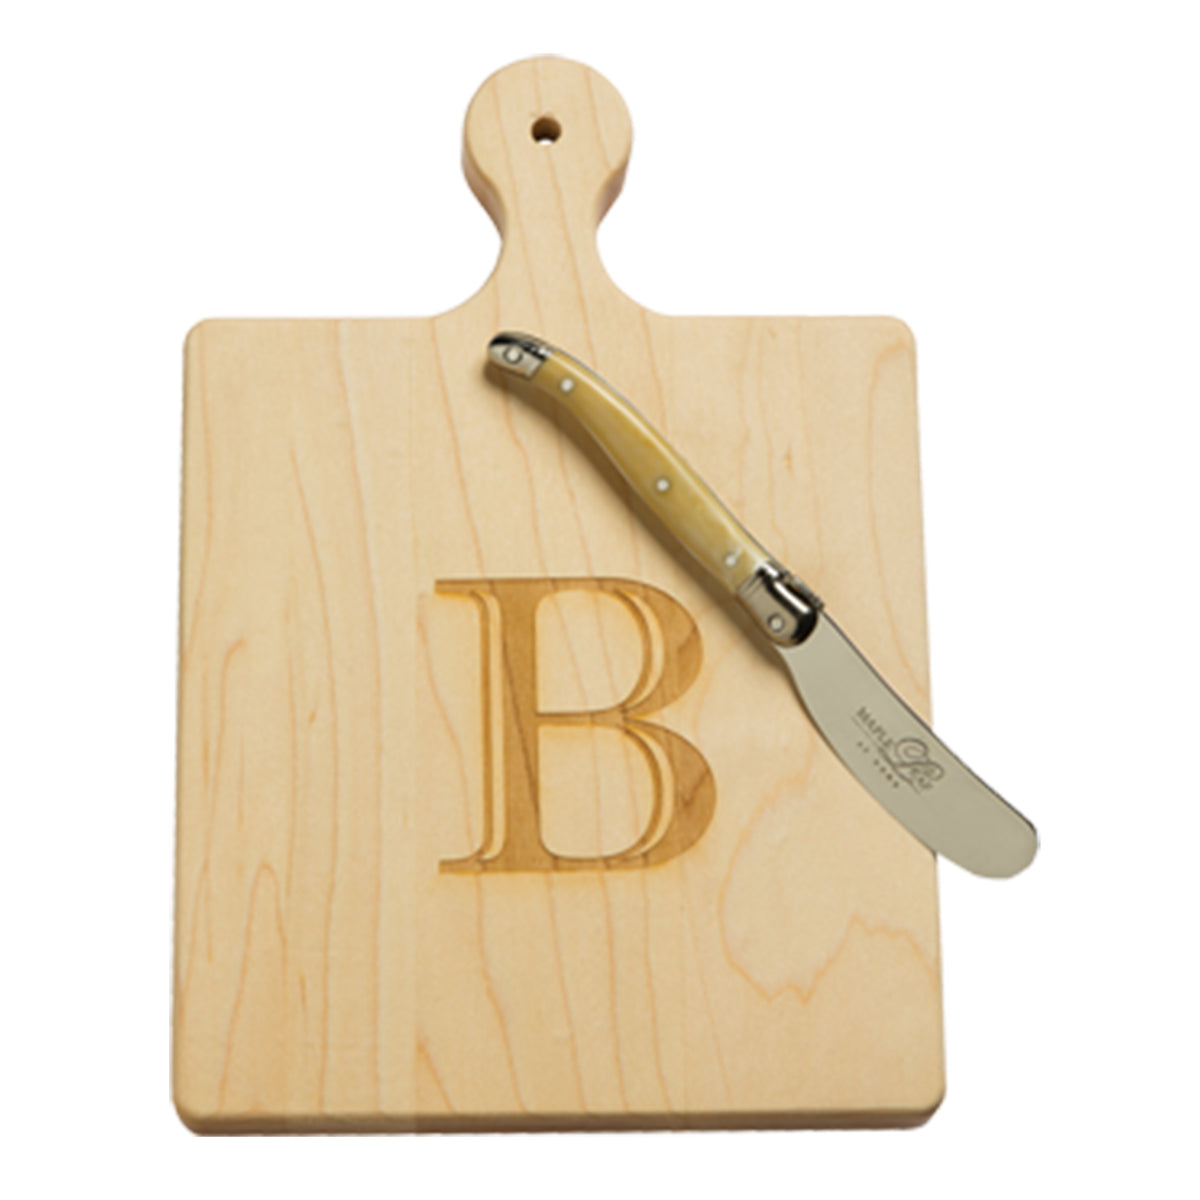 Monogrammed Cutting Board with Spreader - All She Wrote